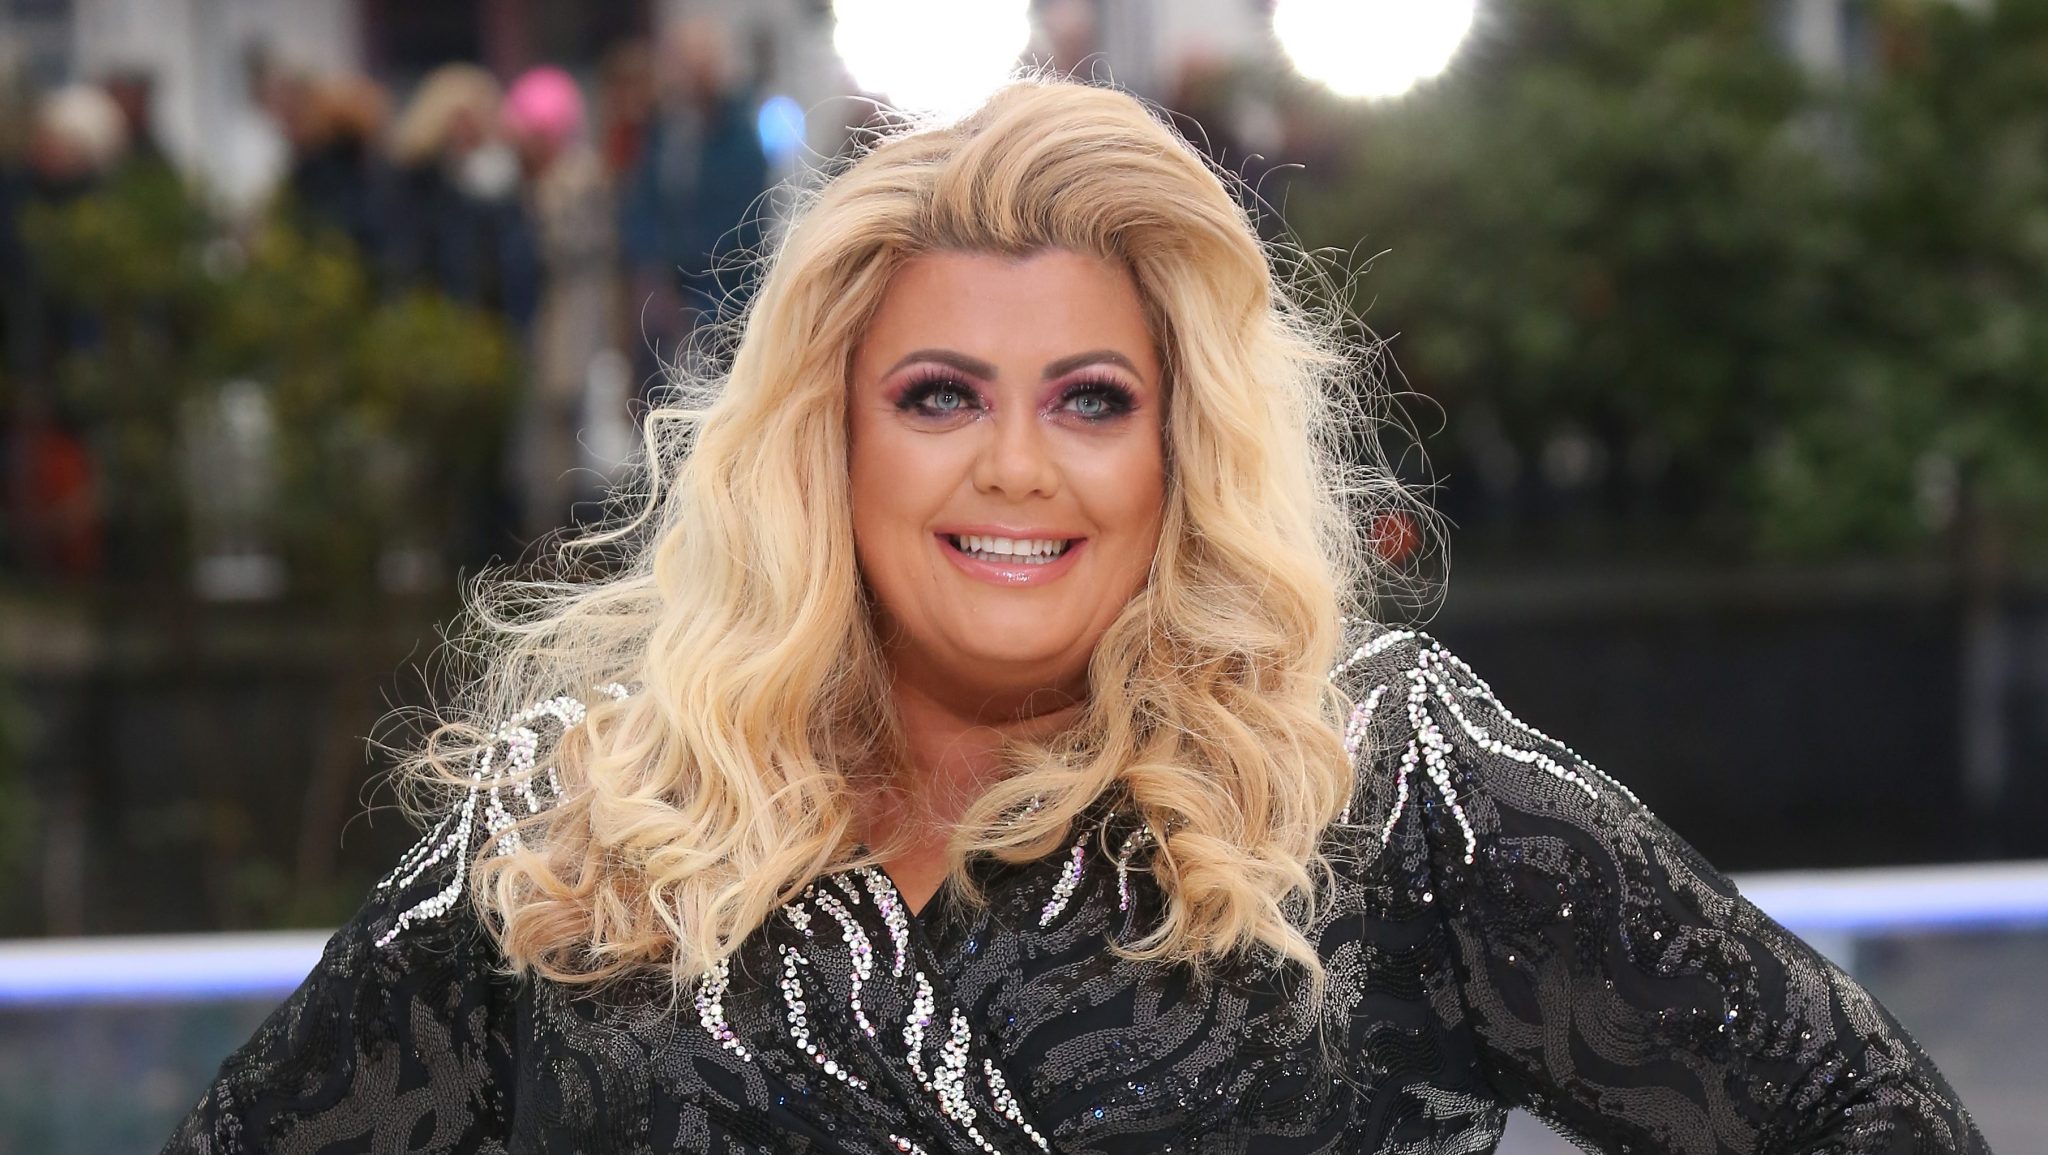 Gemma Collins reveals her transformation after 3 stone weight loss in new snap